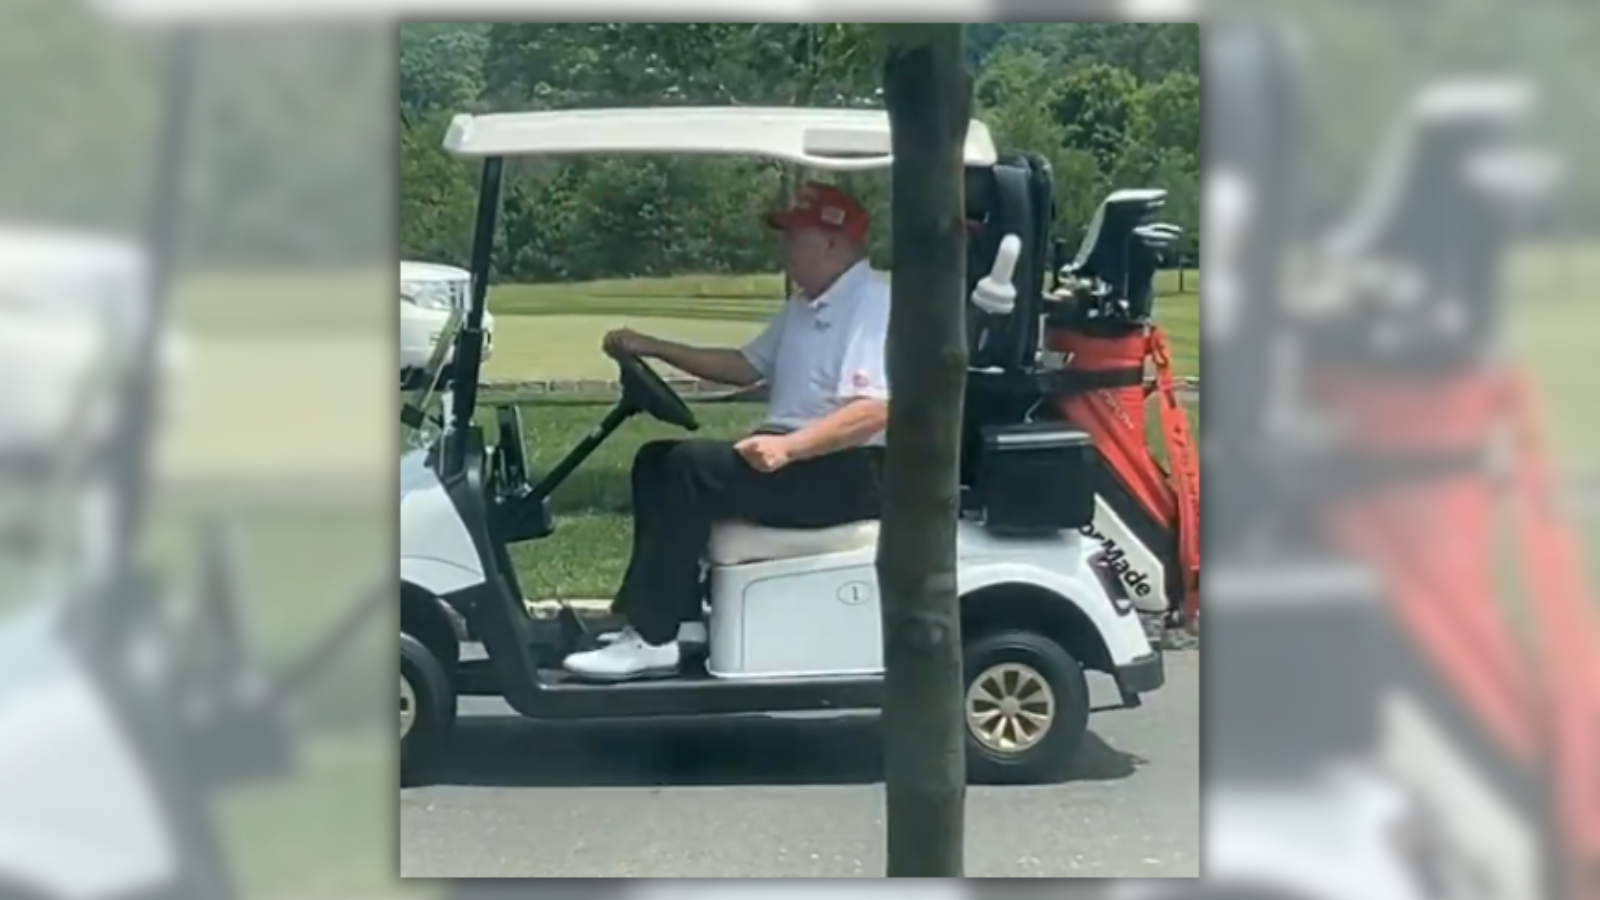 Rumors That Trump Golfed the Day After Assassination Attempt Are Unfounded